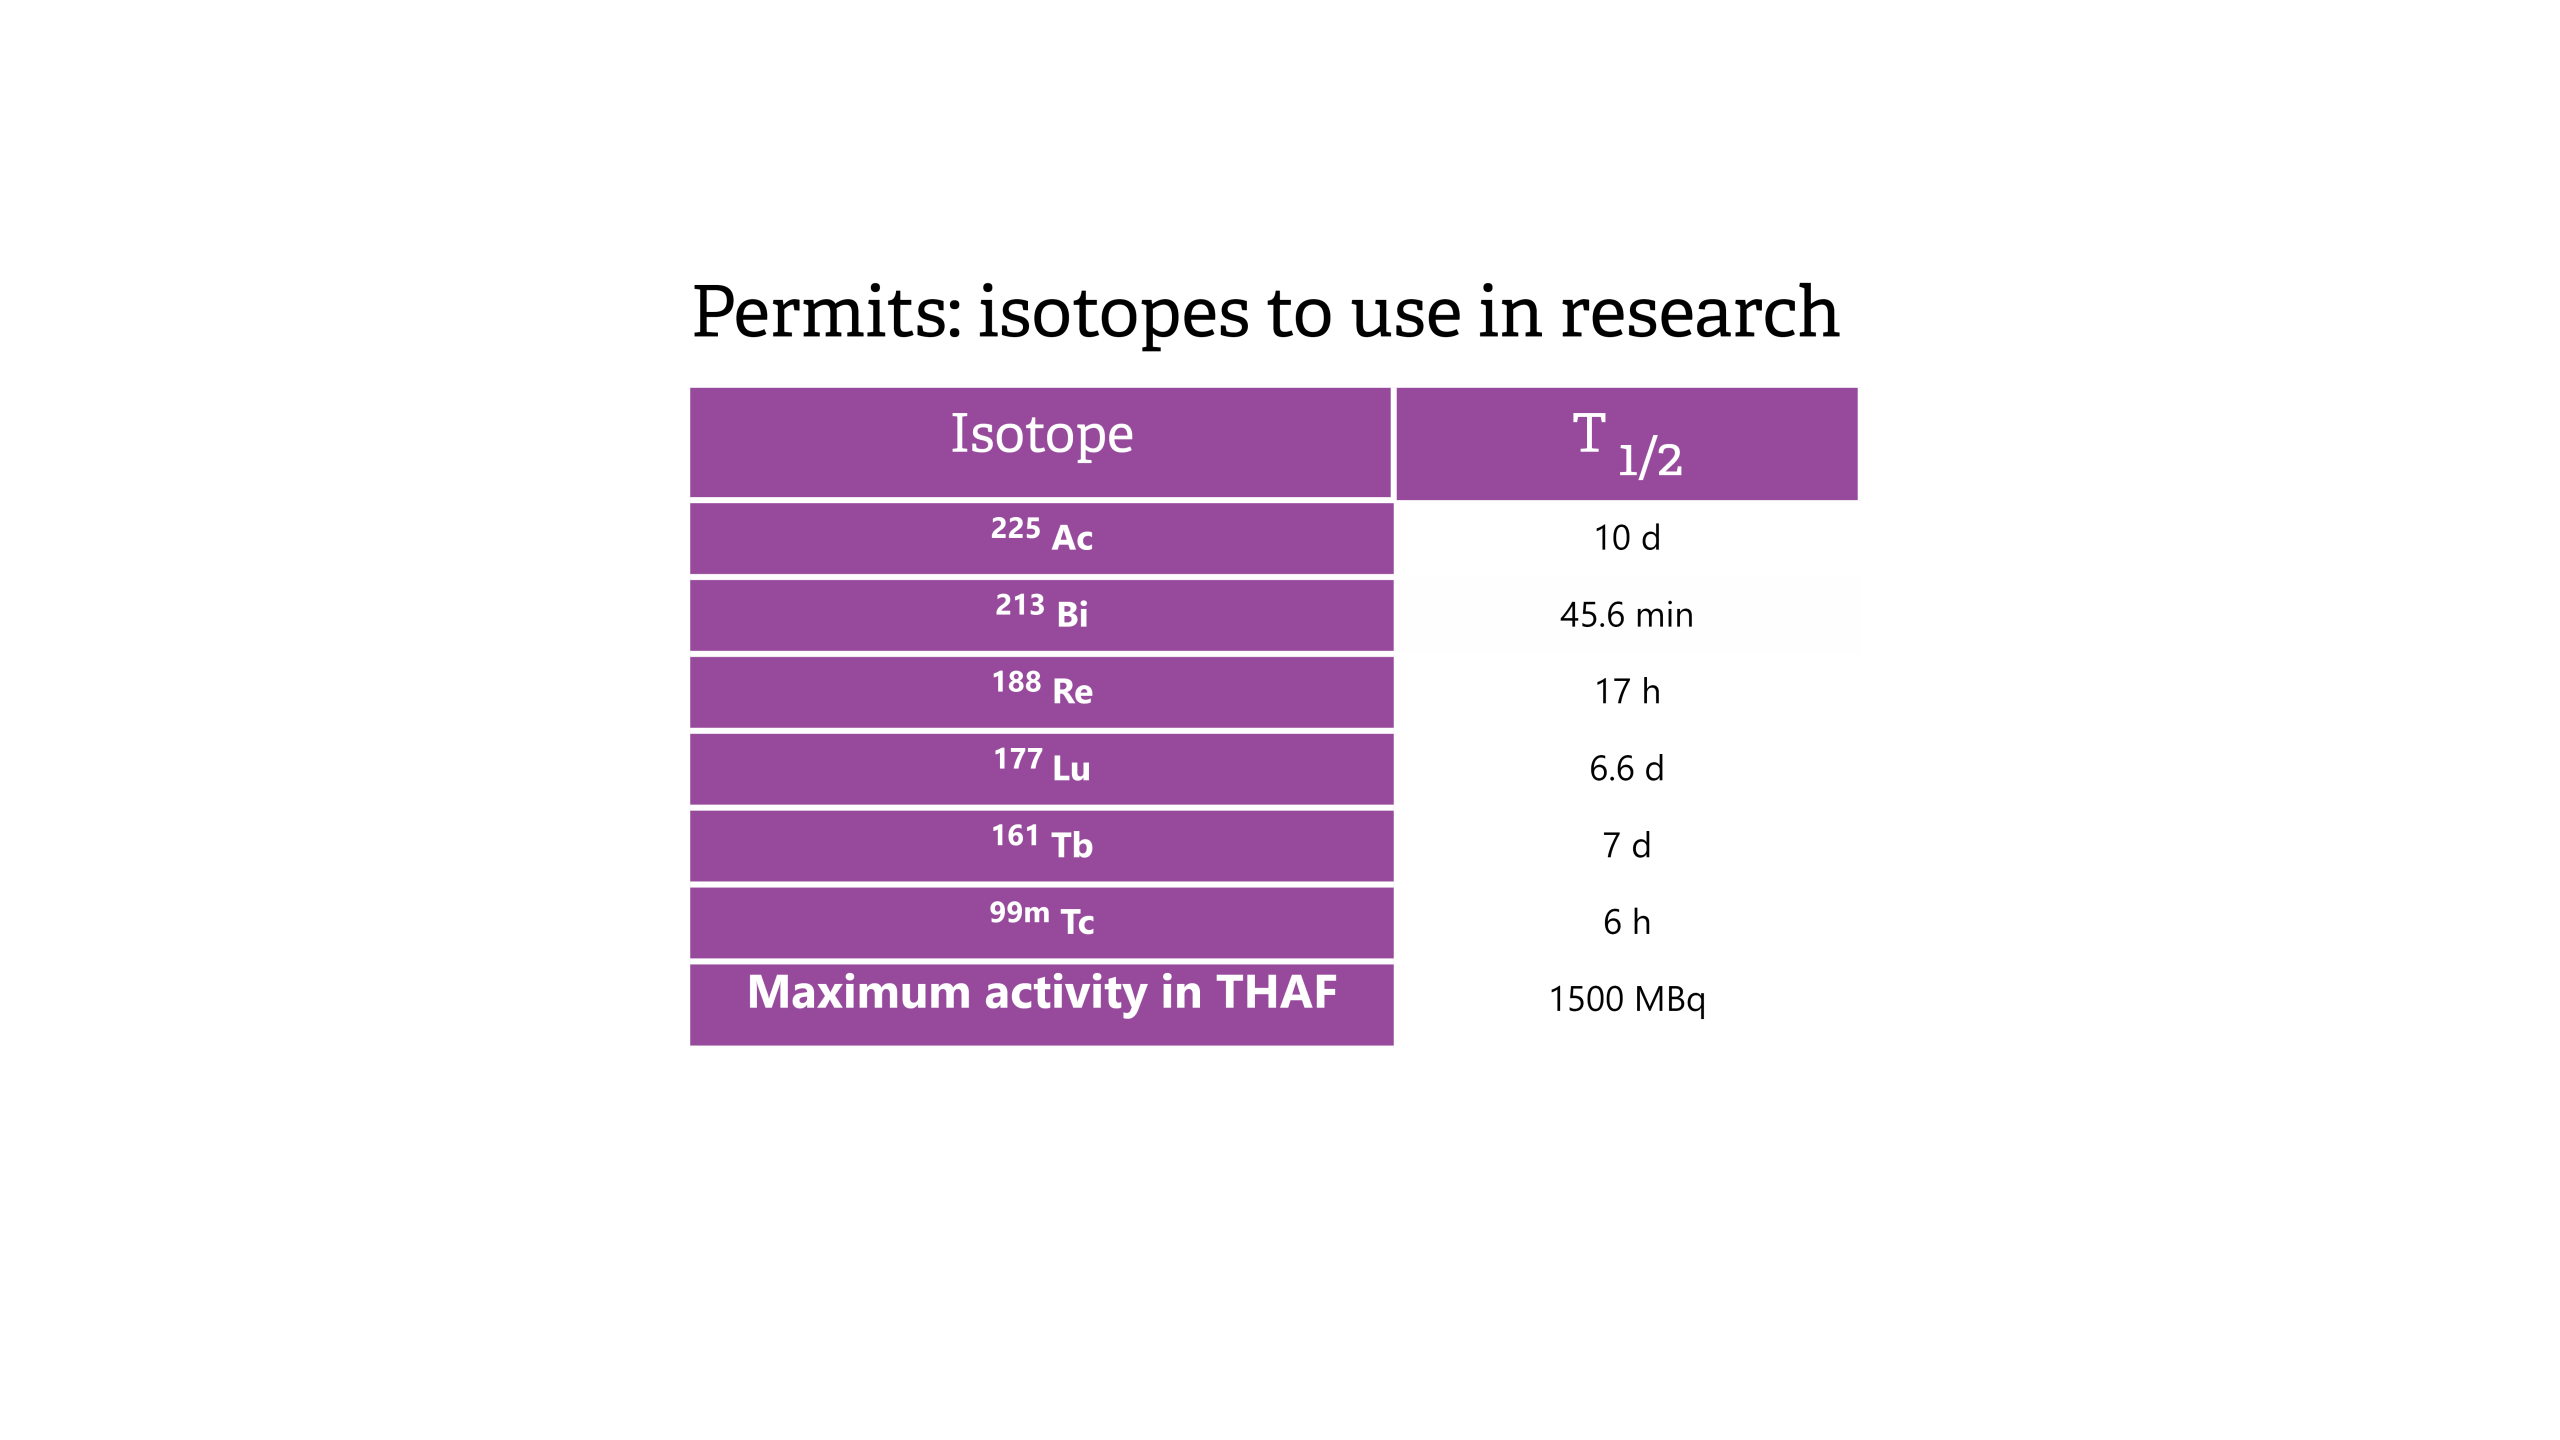 SCK CEN permits - isotopes to use in research (2020)